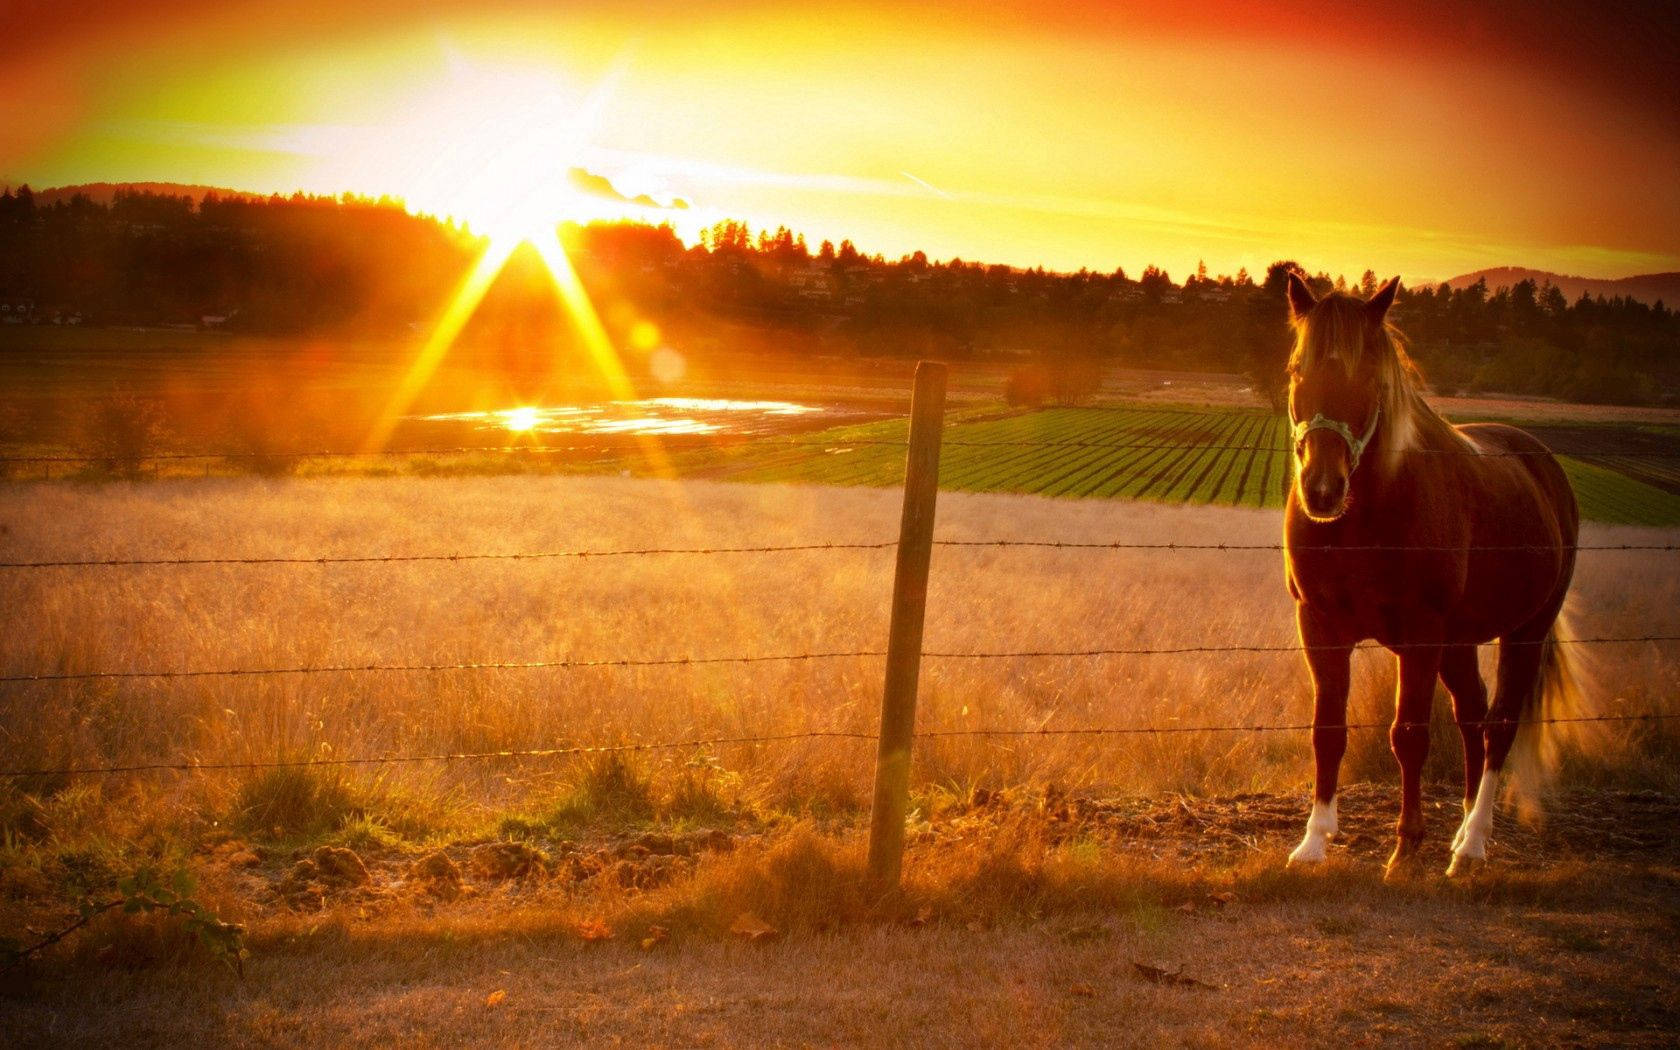 Fenced Horse In Sunset